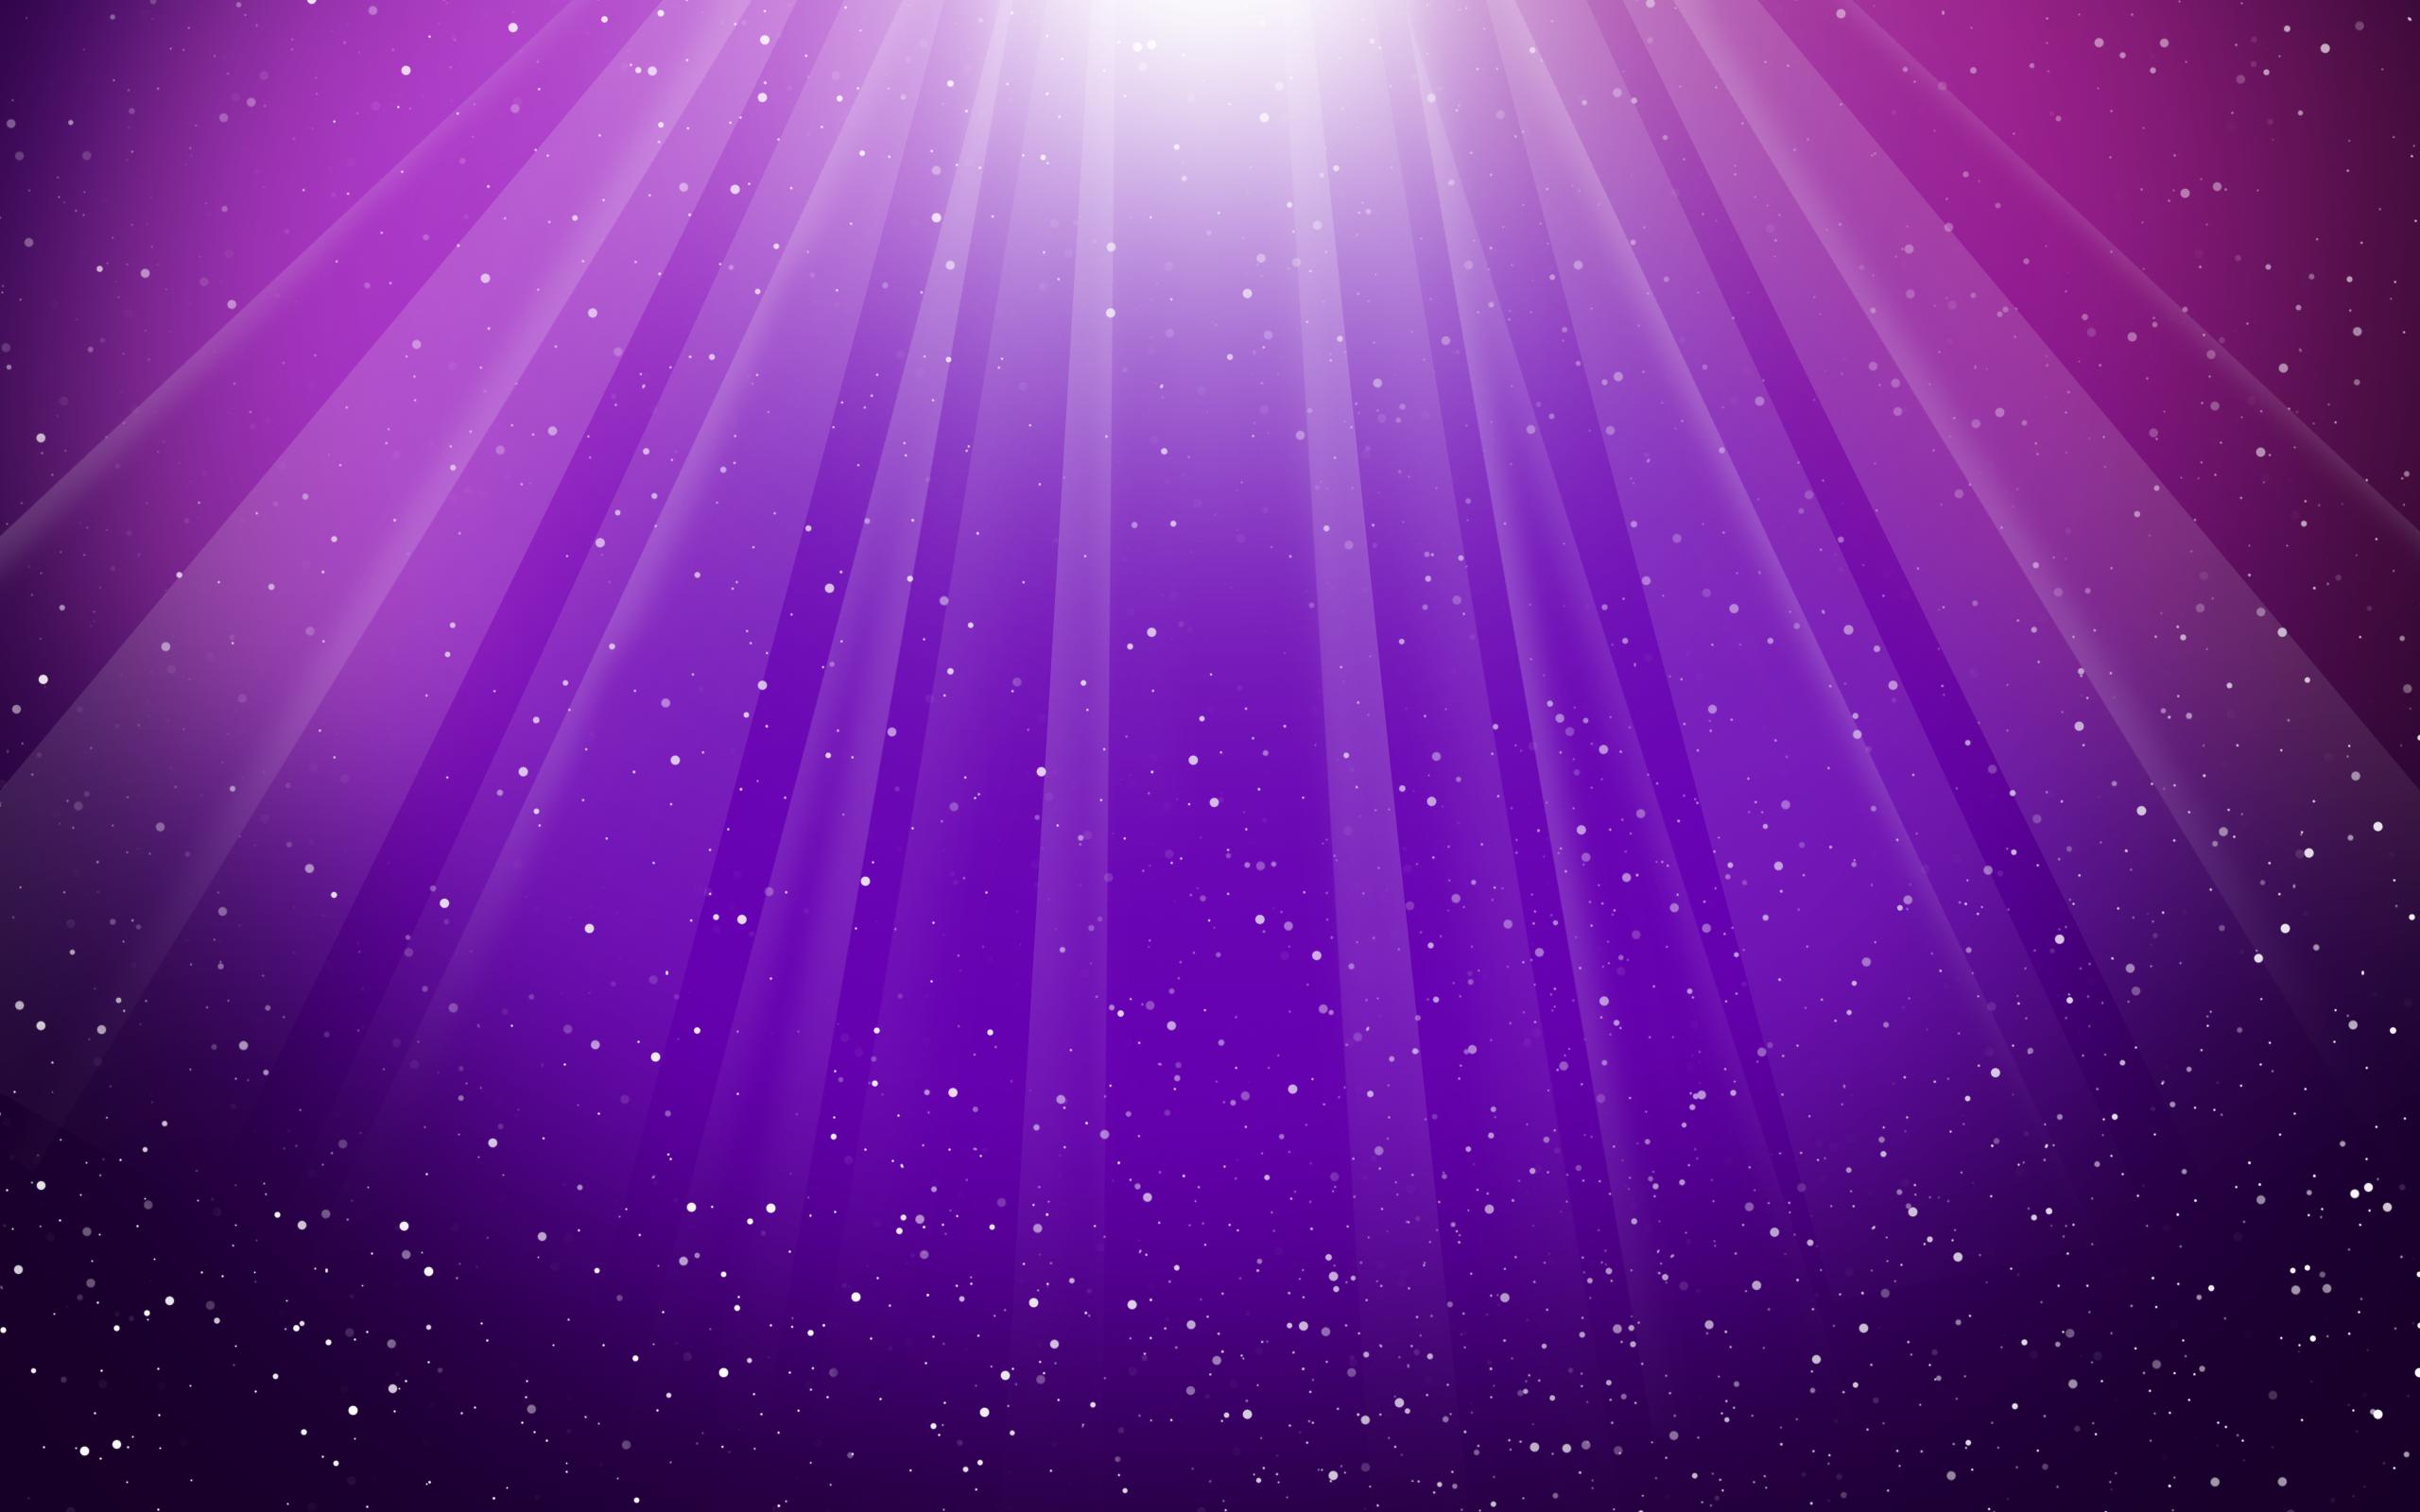 Abstract, High Definition Purple Wallpaper Image For Free